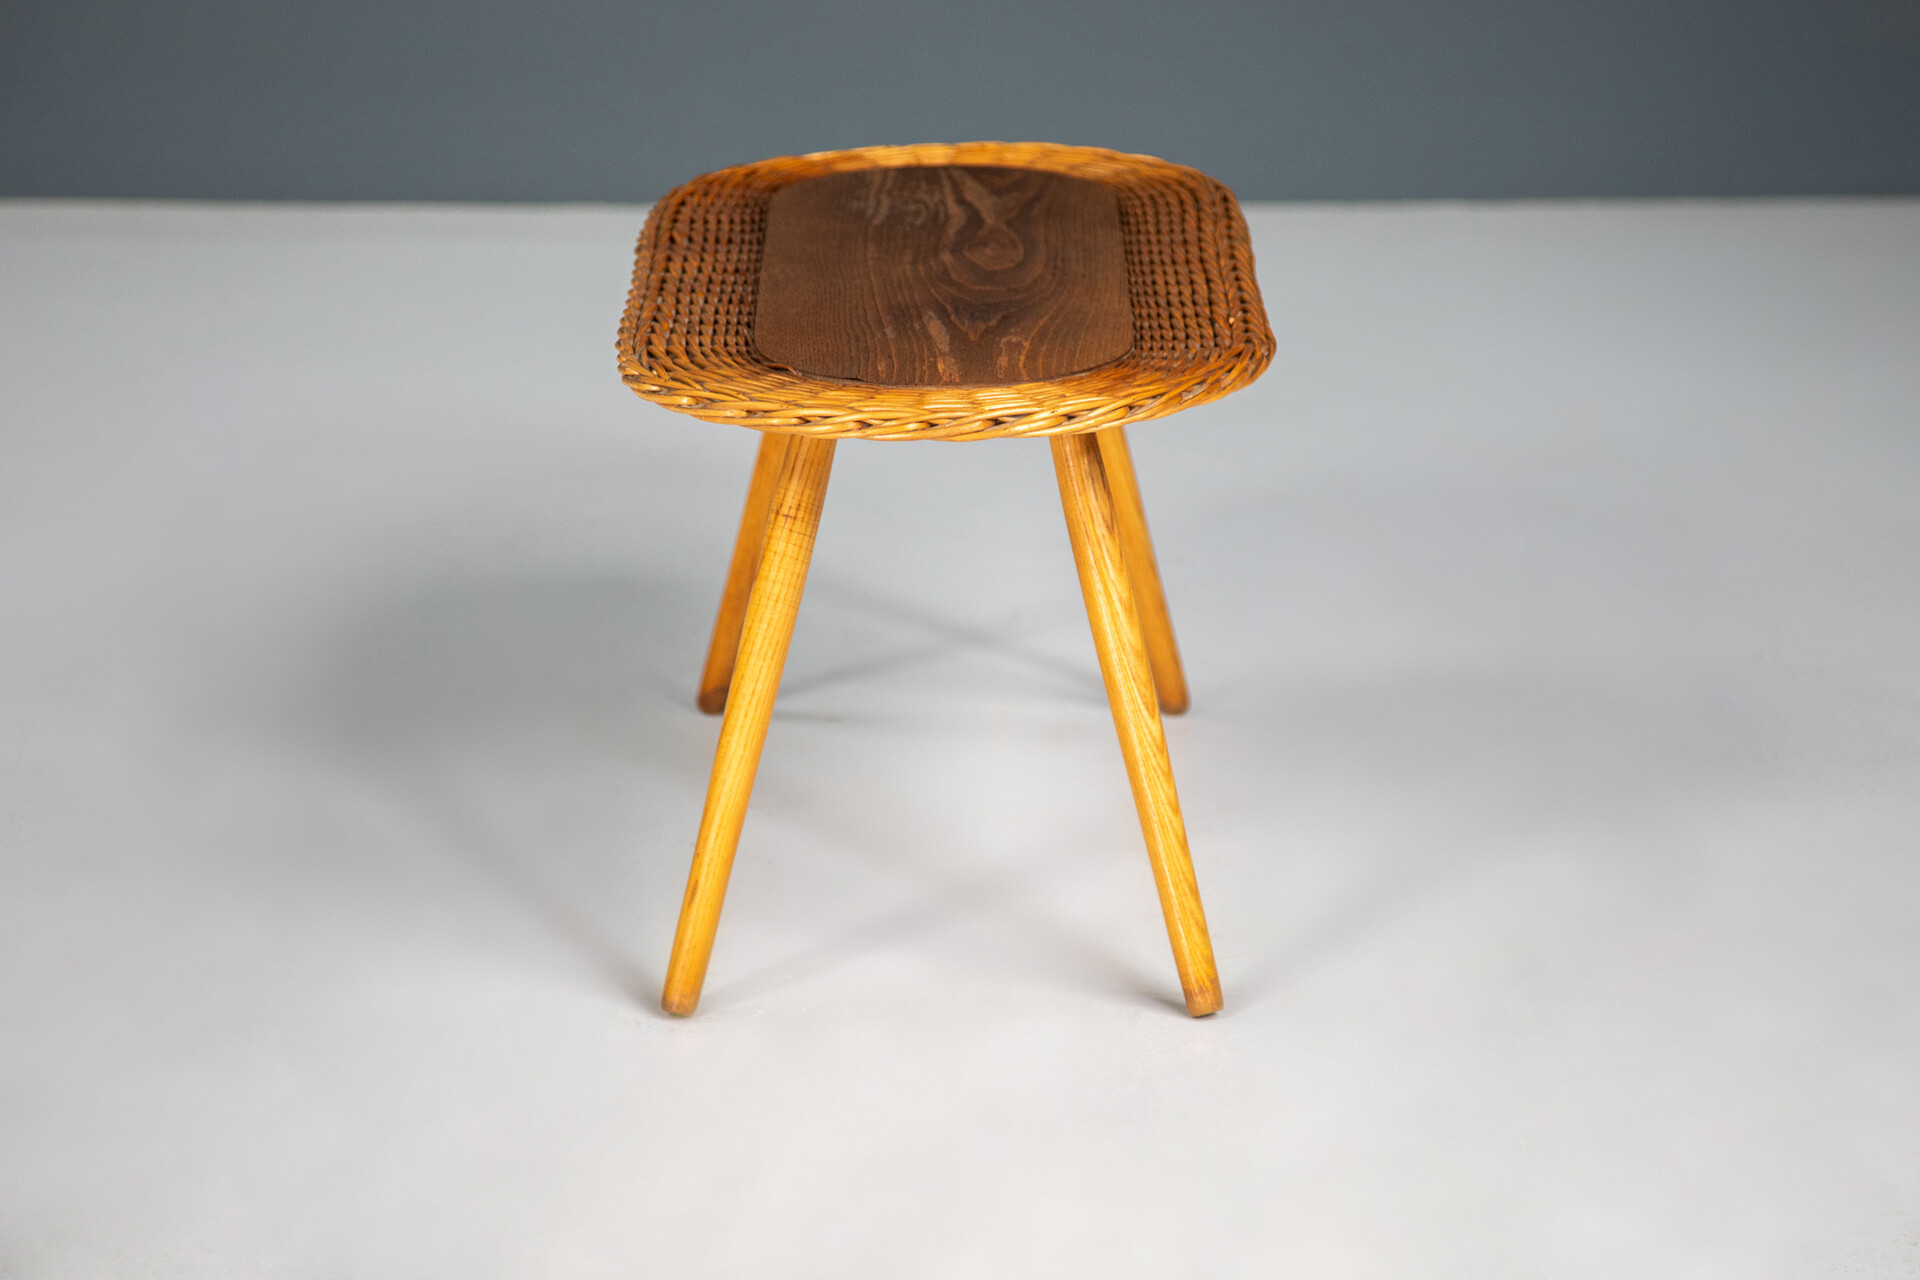 Mid century modern Set/3 wood and wicker side tables, France 1950s Mid-20th century